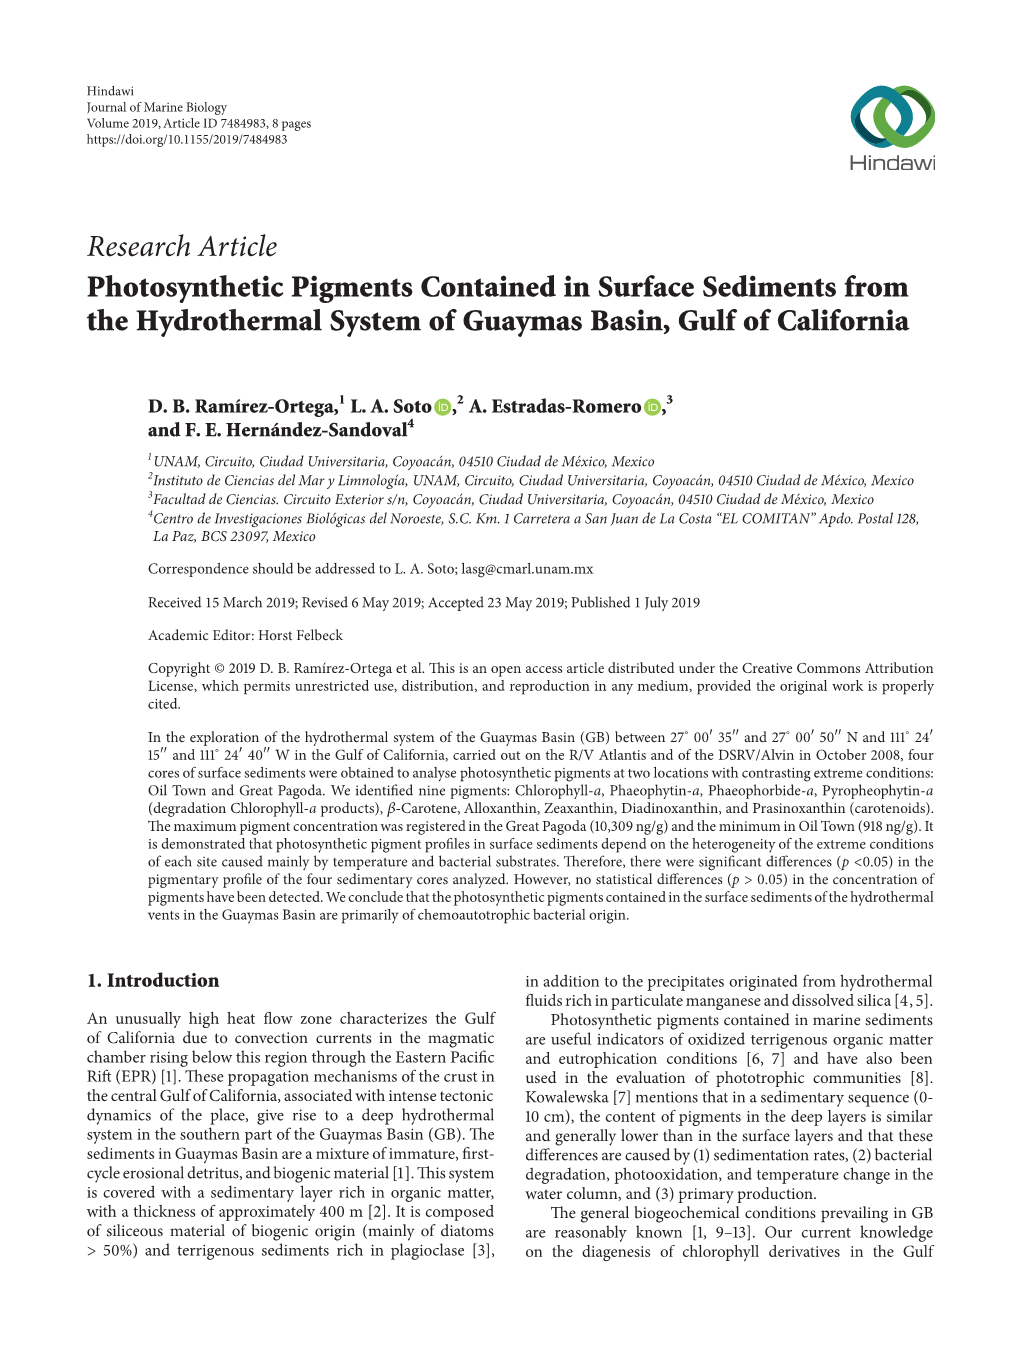 Research Article Photosynthetic Pigments Contained in Surface Sediments from the Hydrothermal System of Guaymas Basin, Gulf of California